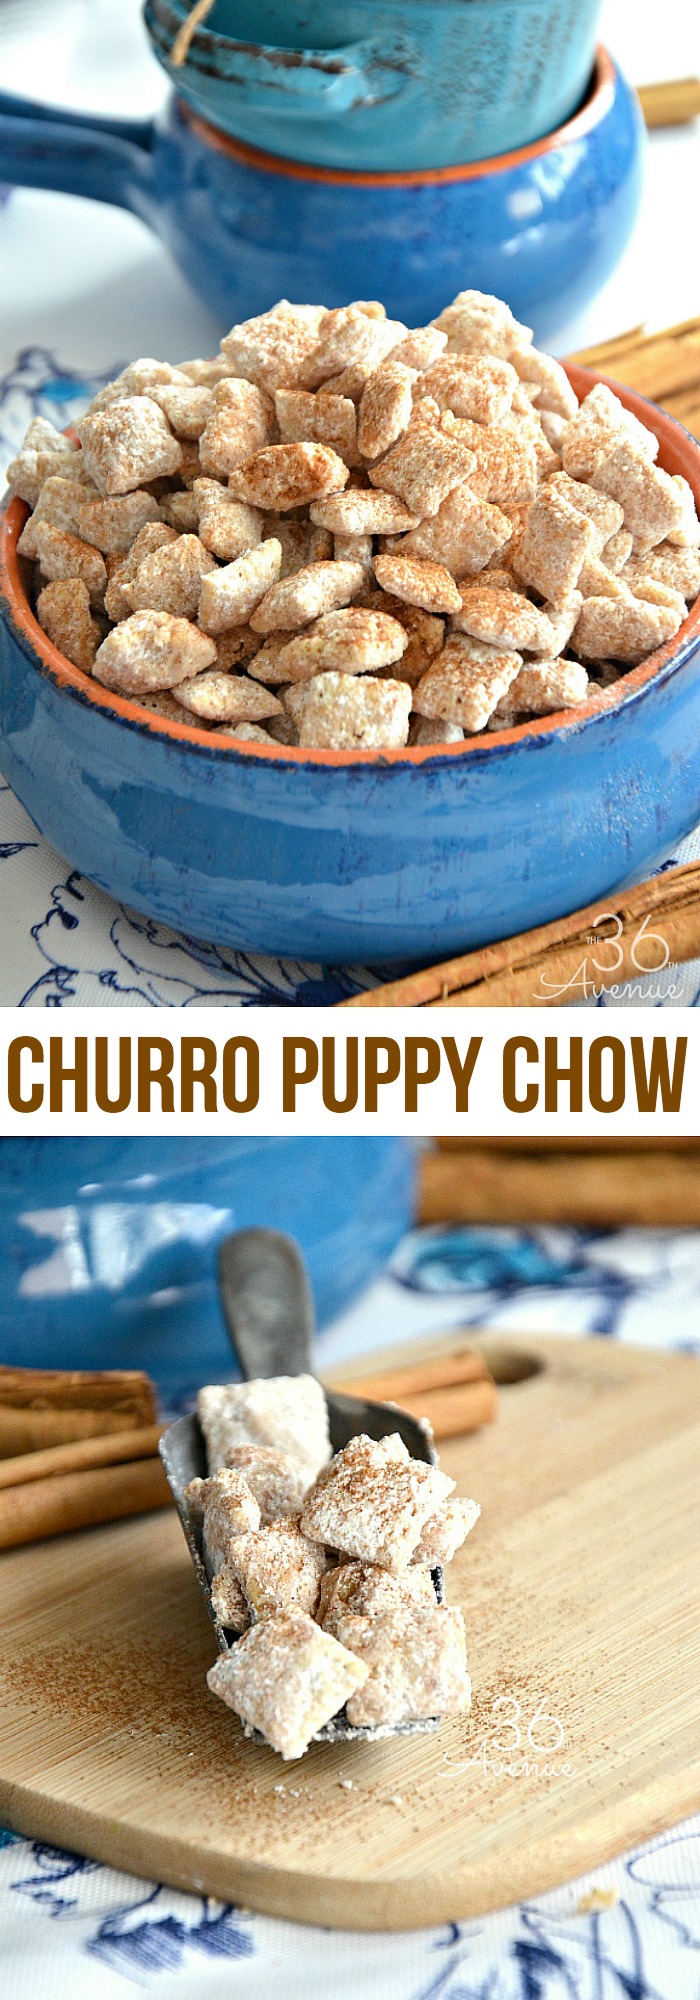 Churro Puppy Chow Recipe - Easy snack or dessert inspired by the delicious taste of sugar and cinnamon dipped churros.